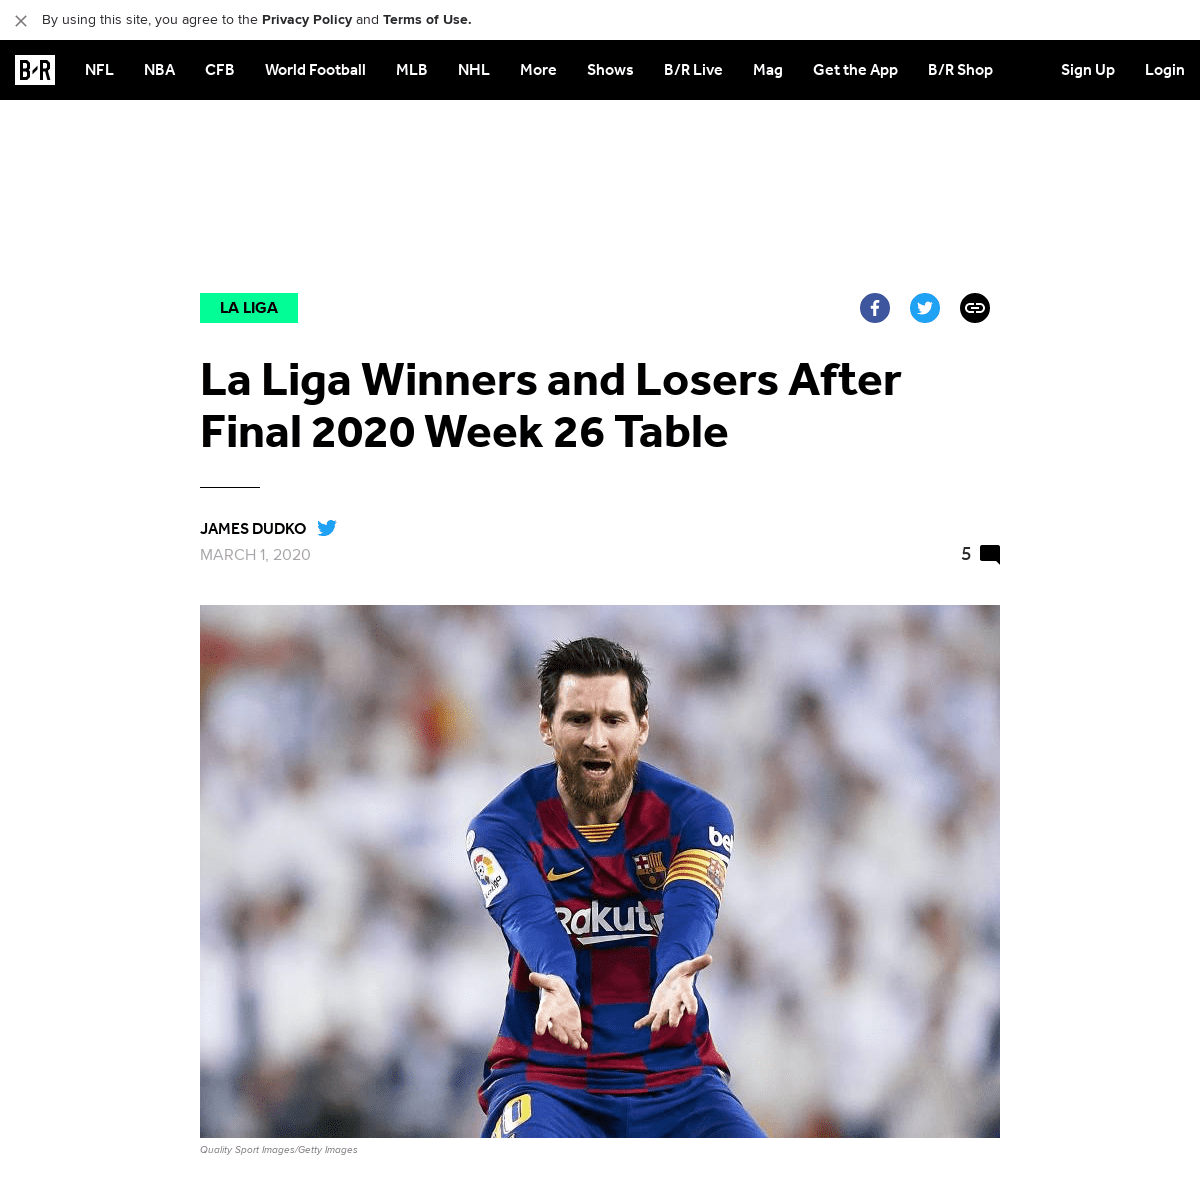 A complete backup of bleacherreport.com/articles/2878698-la-liga-winners-and-losers-after-final-2020-week-26-table